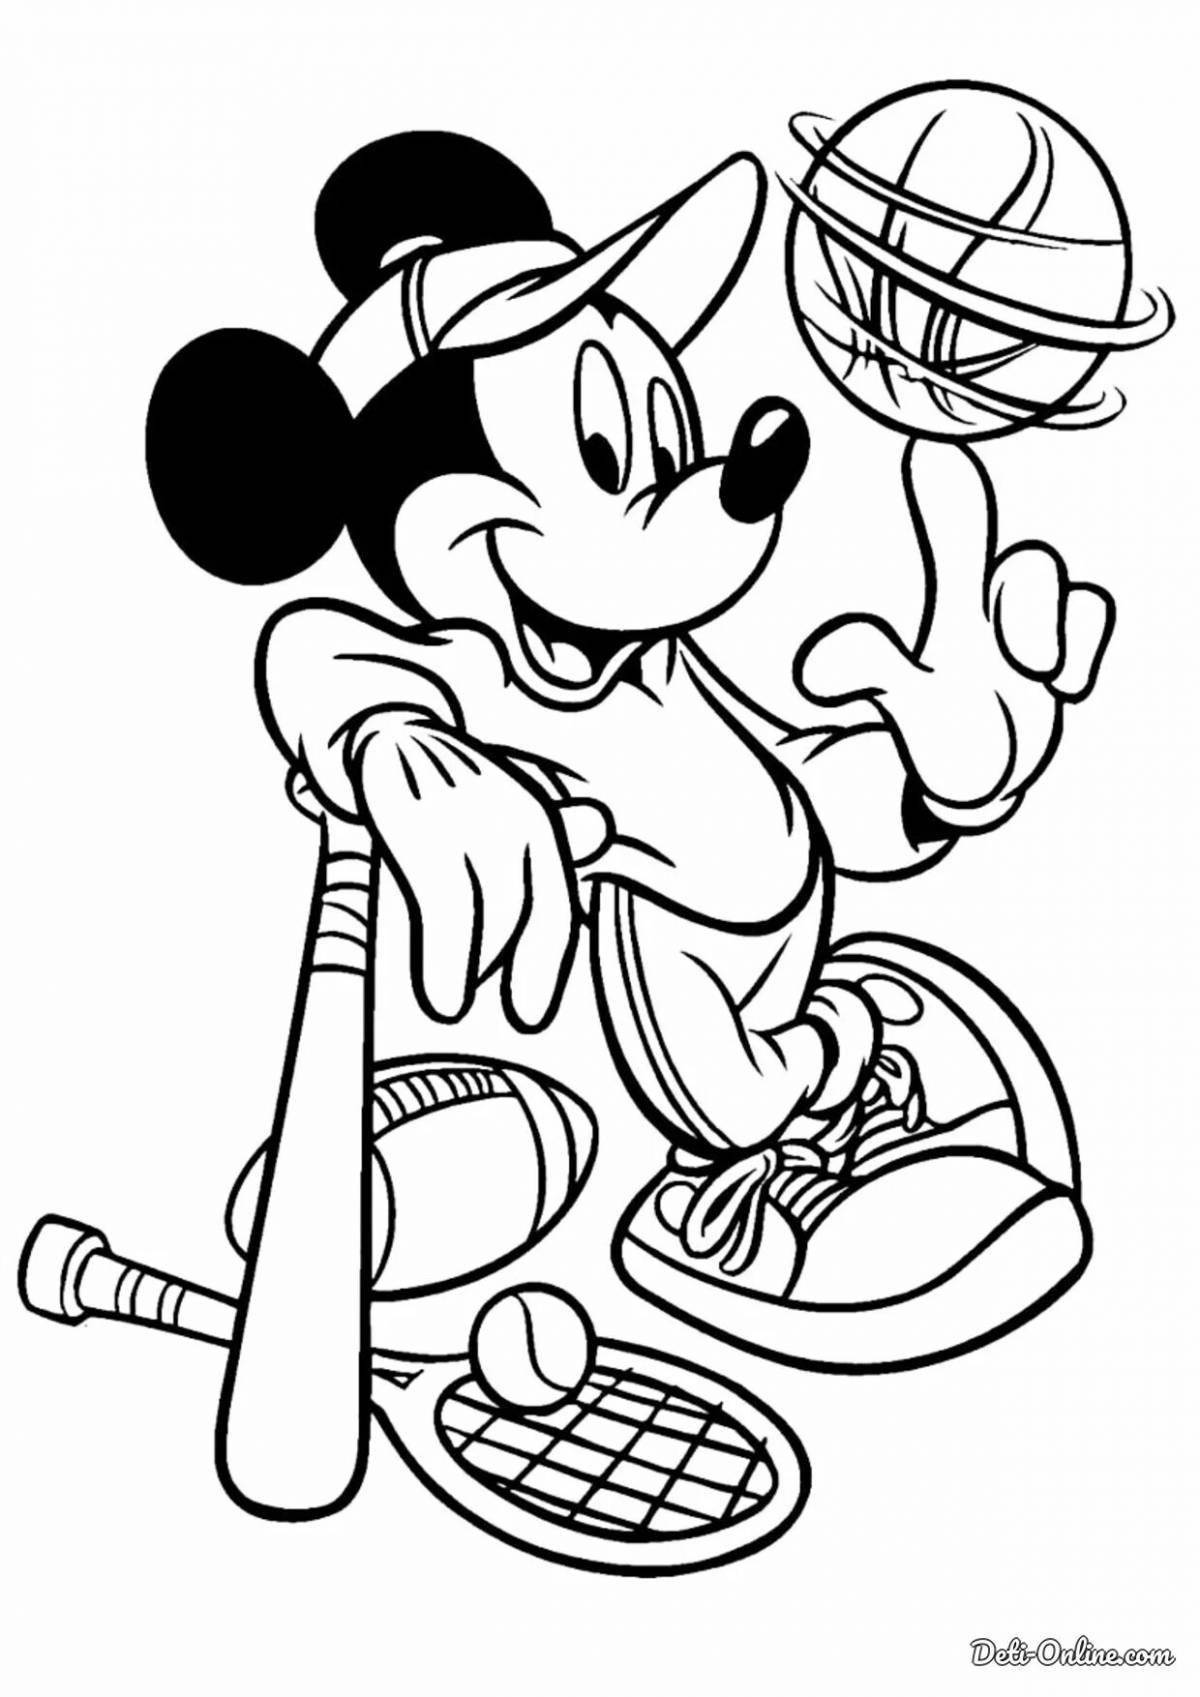 Mickey mouse live coloring for boys